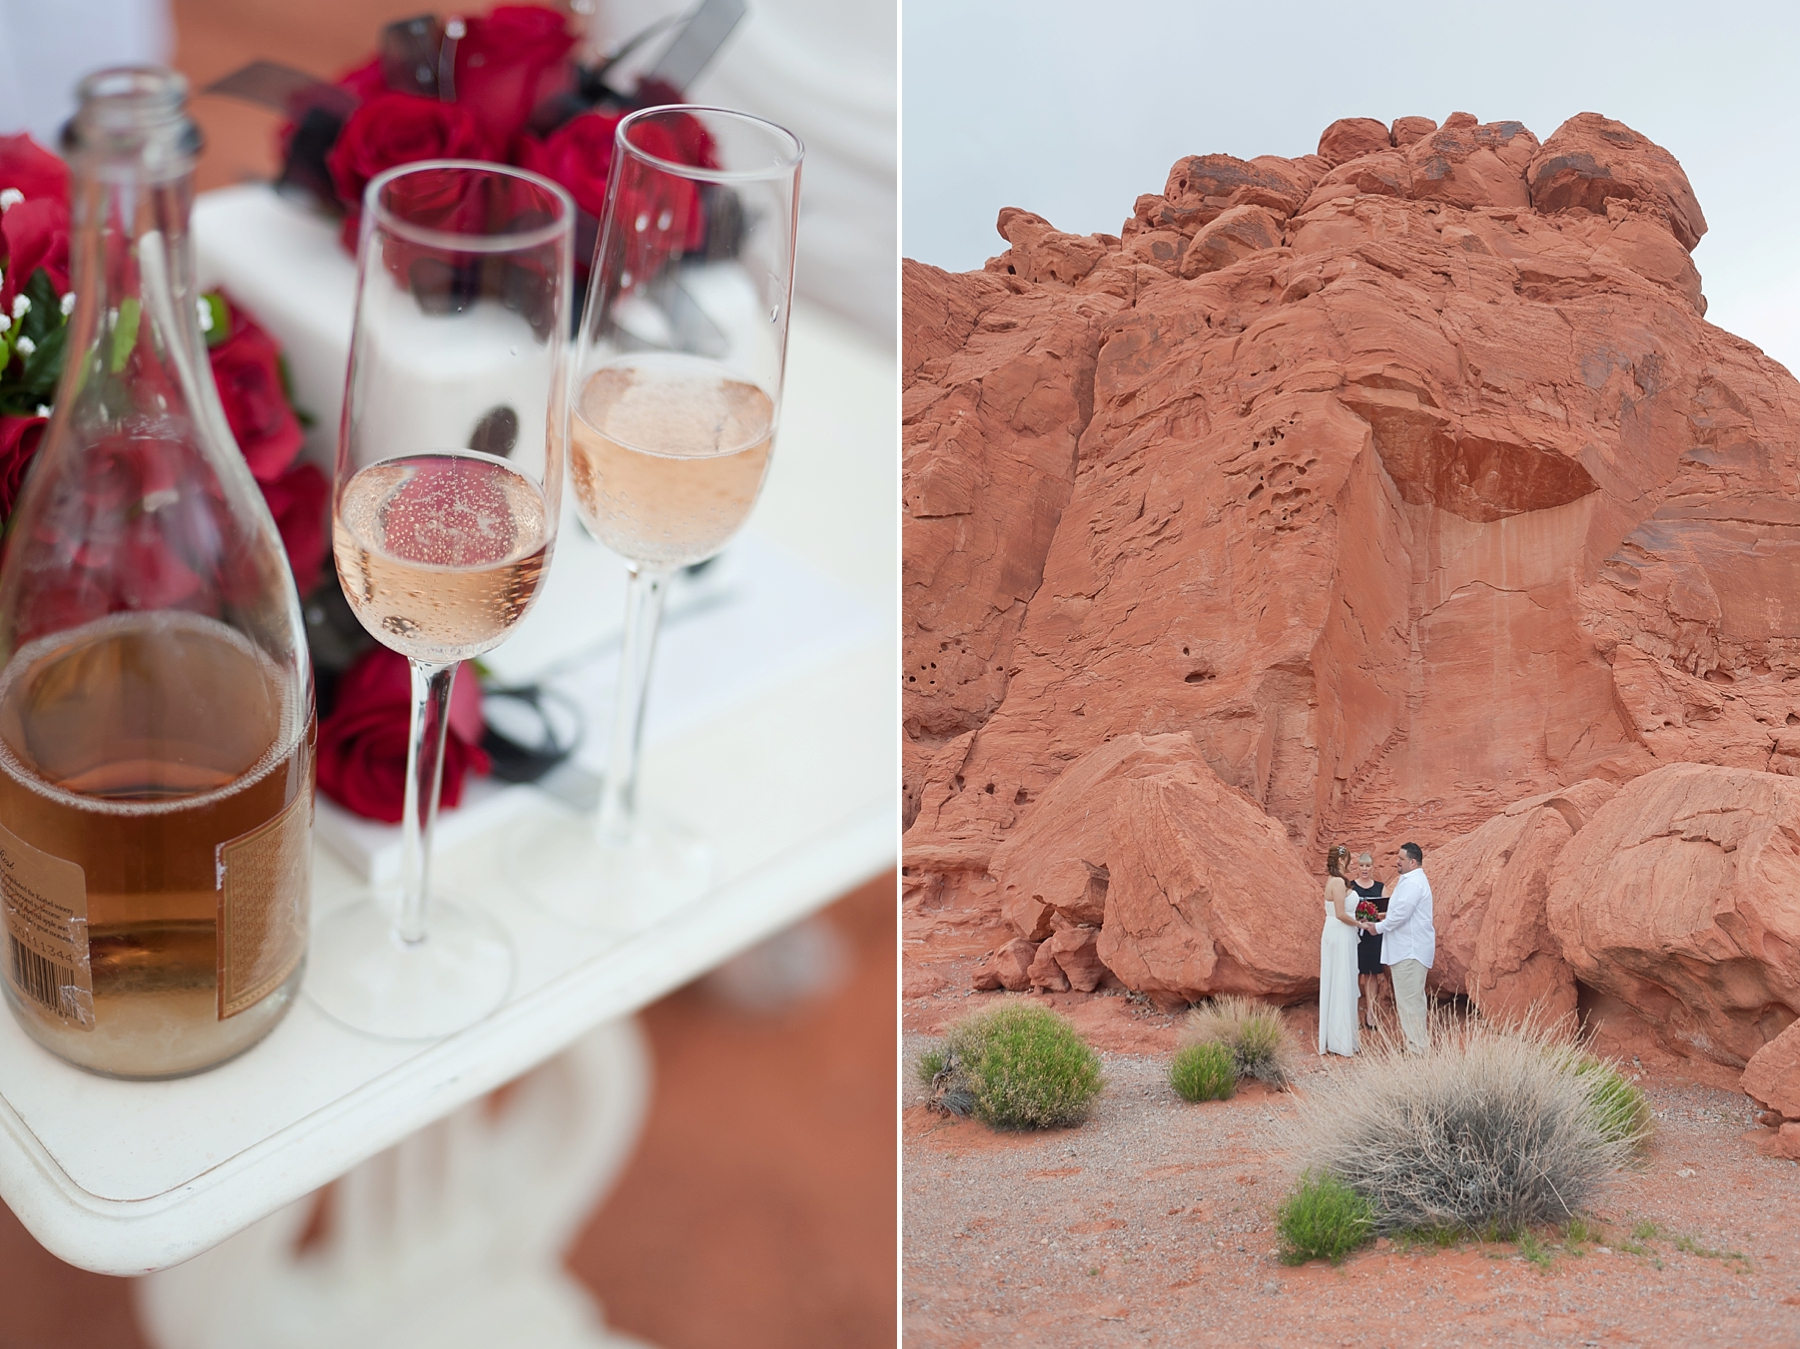 Location: Valley of Fire State Park | Officiant: Peachy Keen Unions | Cake: Freeds Bakery